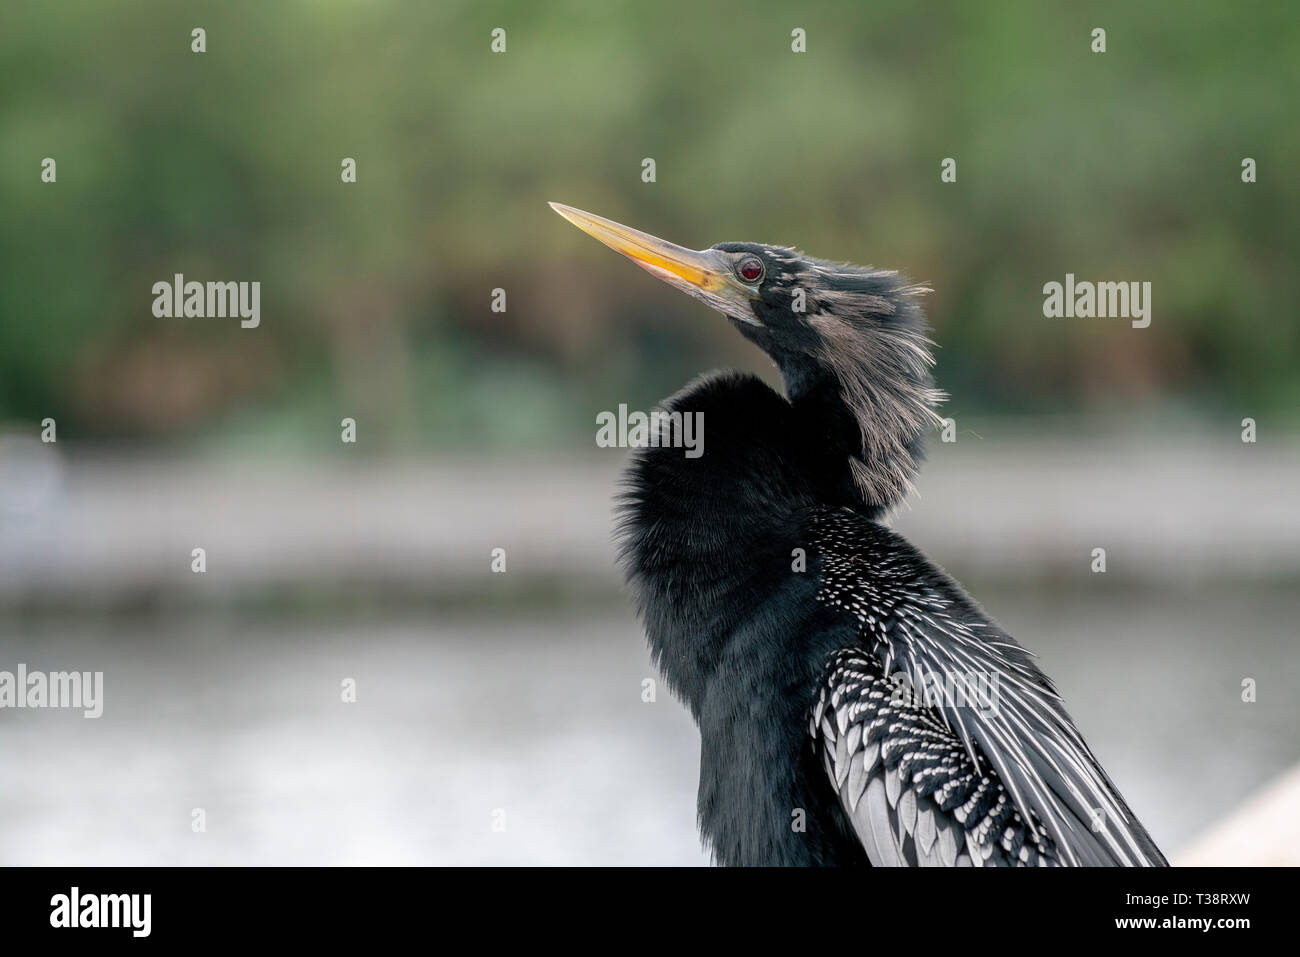 A male Anhinga at a nature preserve in Florida USA Stock Photo